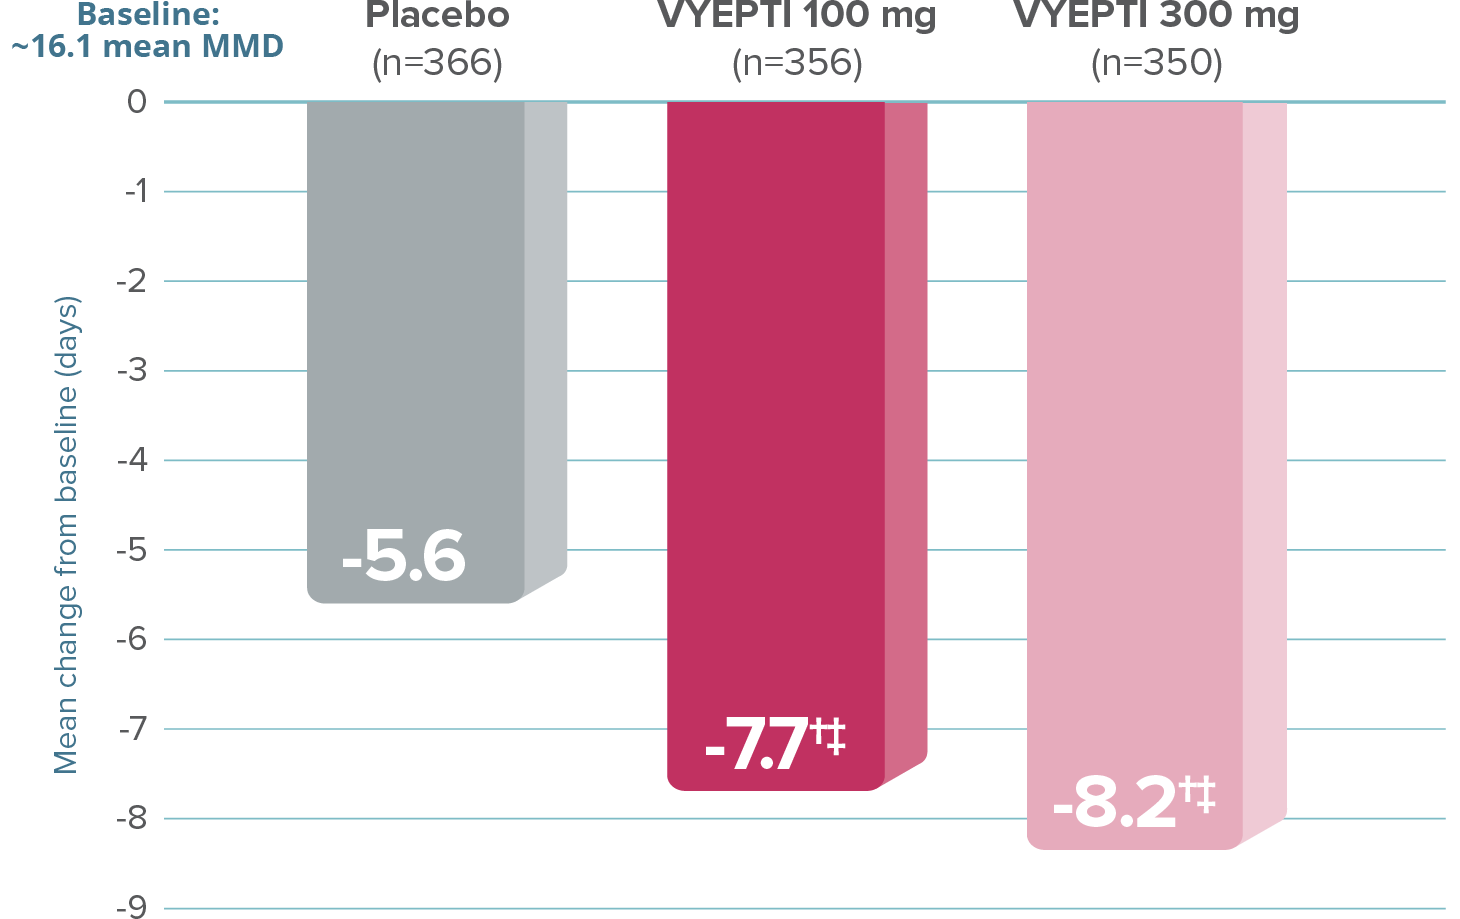 Graph showing that, after the first dose, VYEPTI 100 mg and 300 mg dosages reduced the number of mean MMD by 7.7 and 8.2 (Months 1-3), respectively, vs 5.6 with placebo (baseline ~16.1 mean MMD; p<0.001 vs placebo).